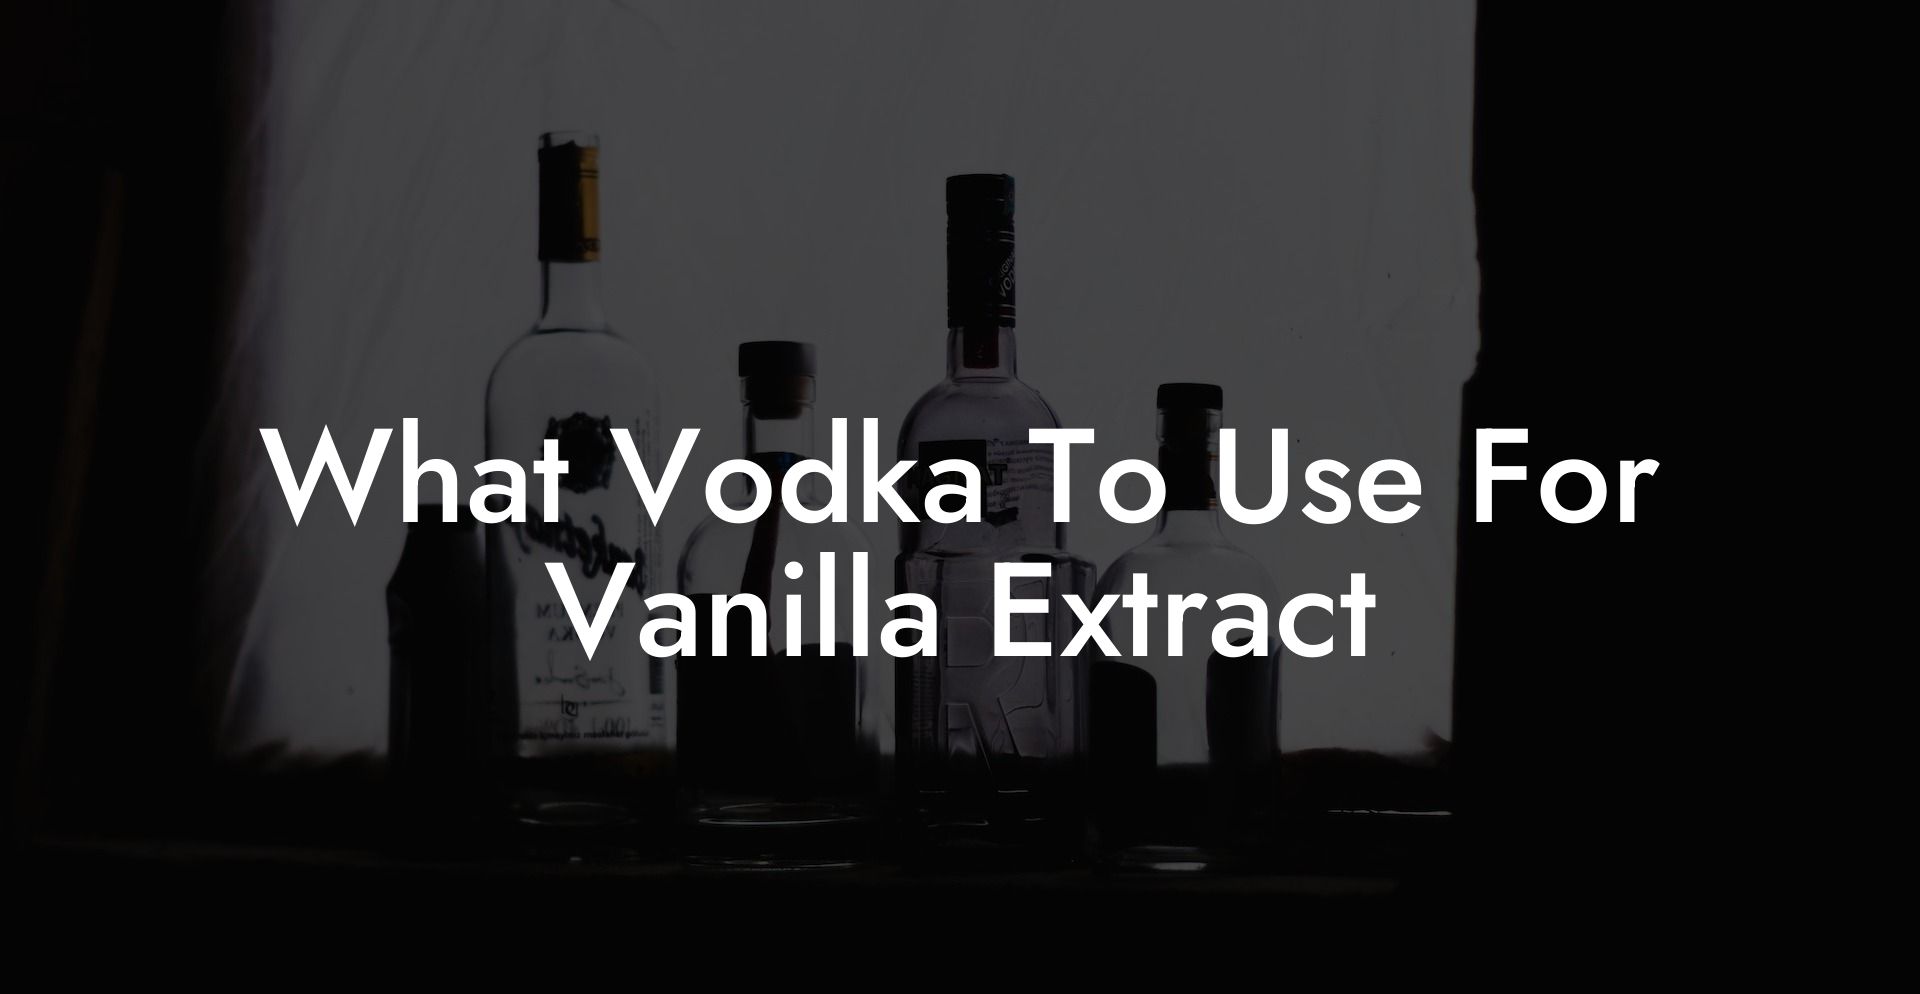 What Vodka To Use For Vanilla Extract